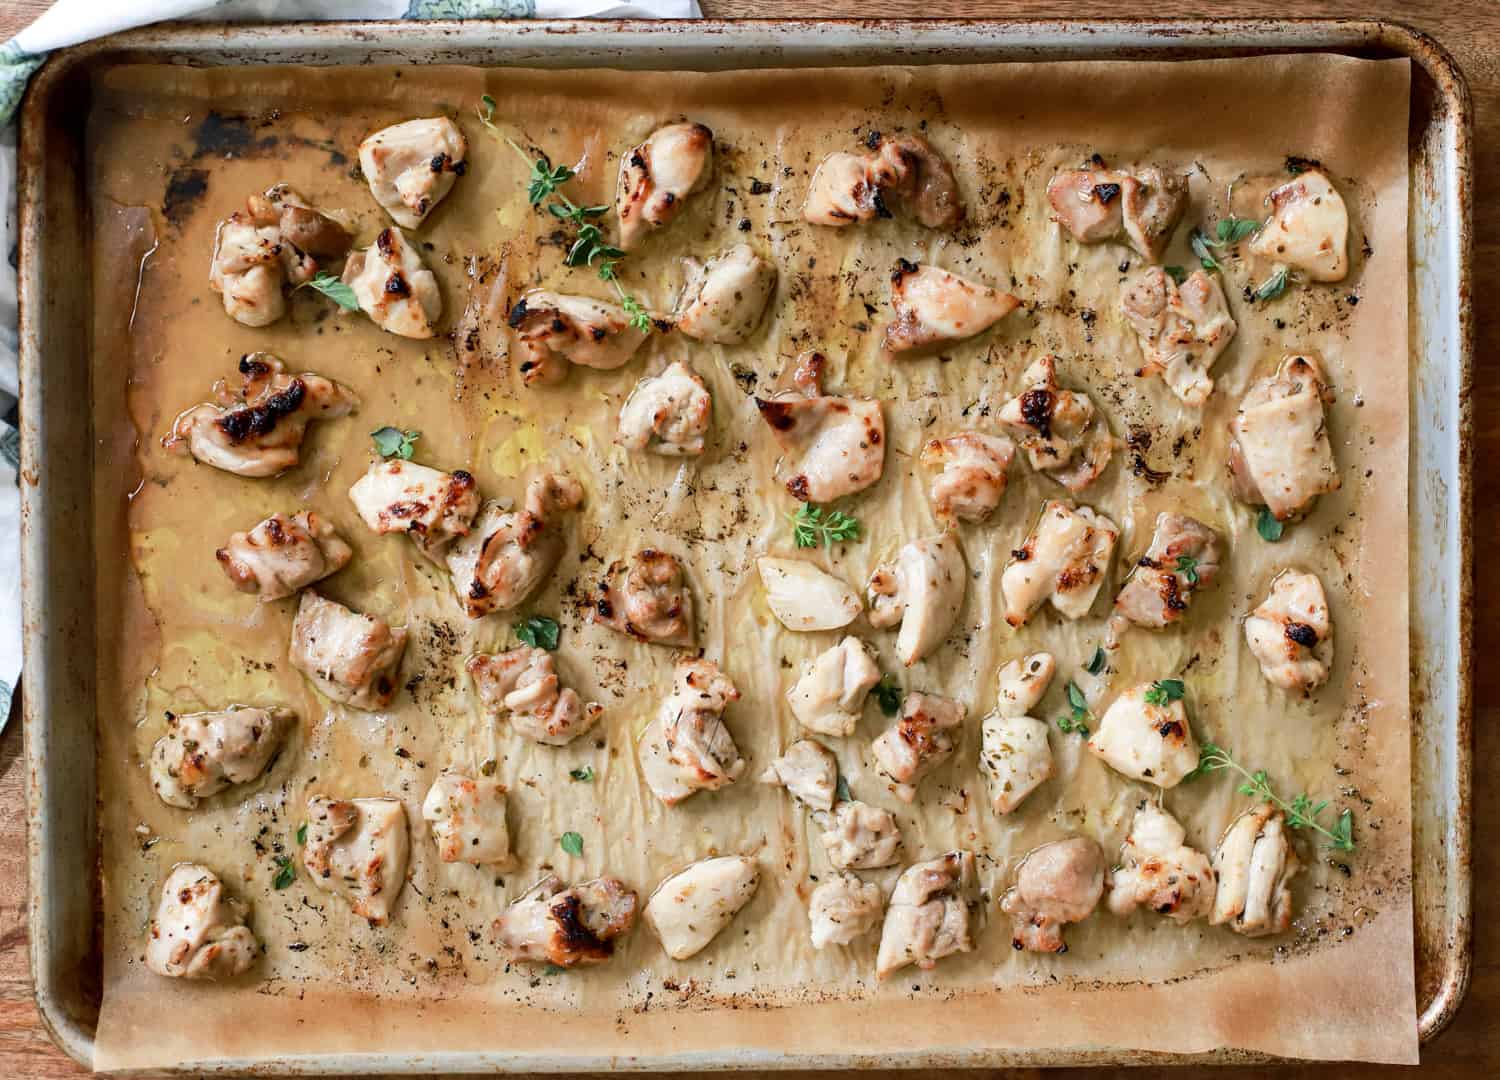 sheet pan with broiled chicken bites topped with oregano.